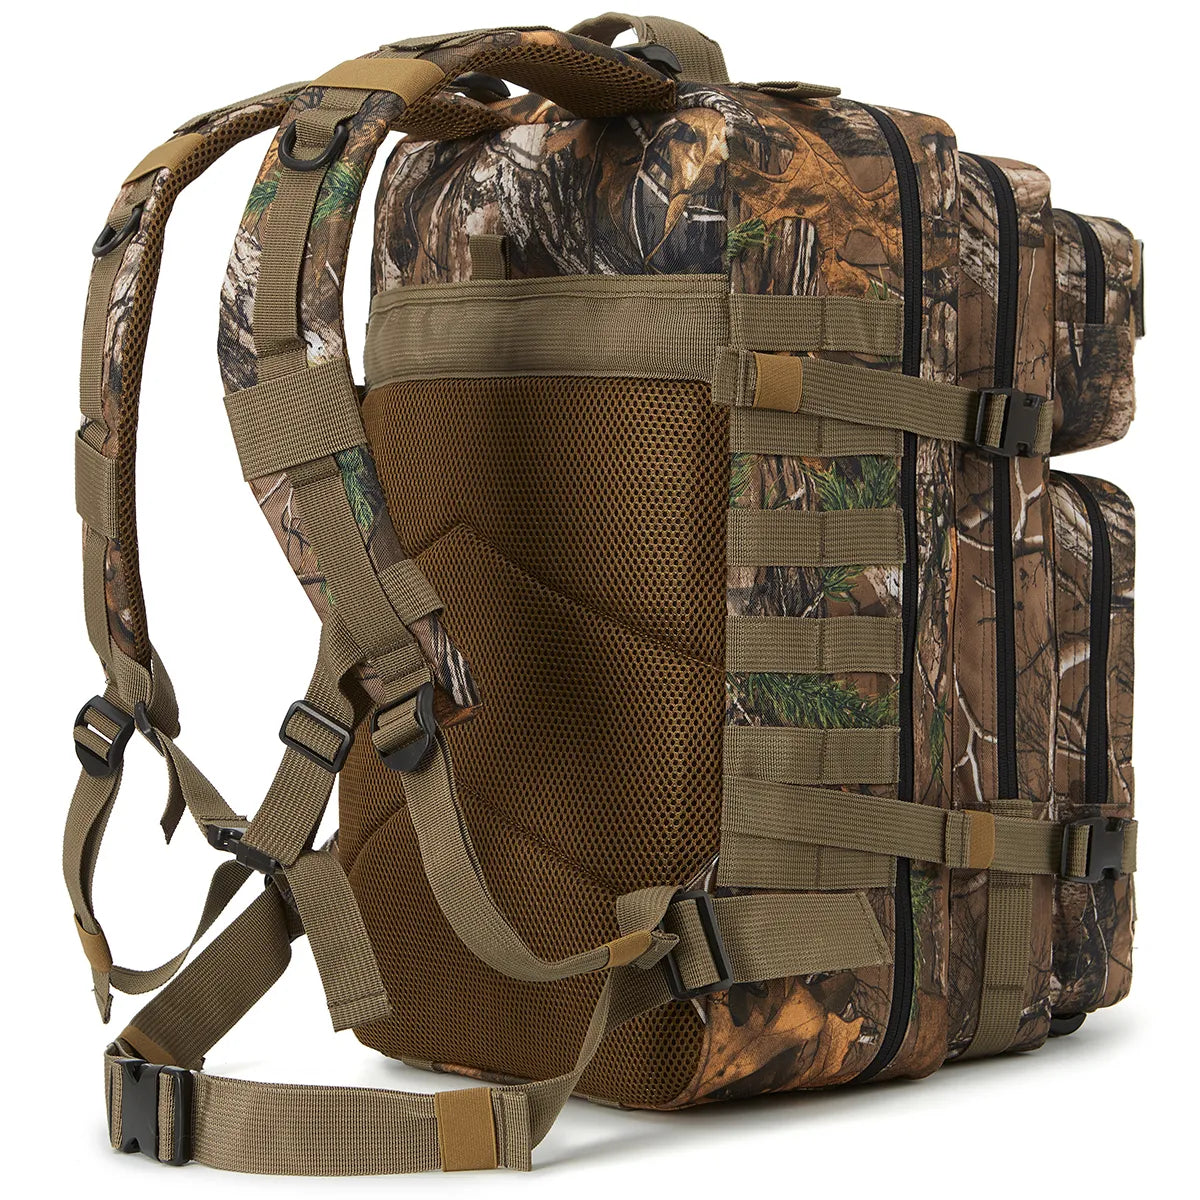 RapidResponse 3-Day Assault Pack: QT&QY Tactical Backpack From Rancher’s Ridge